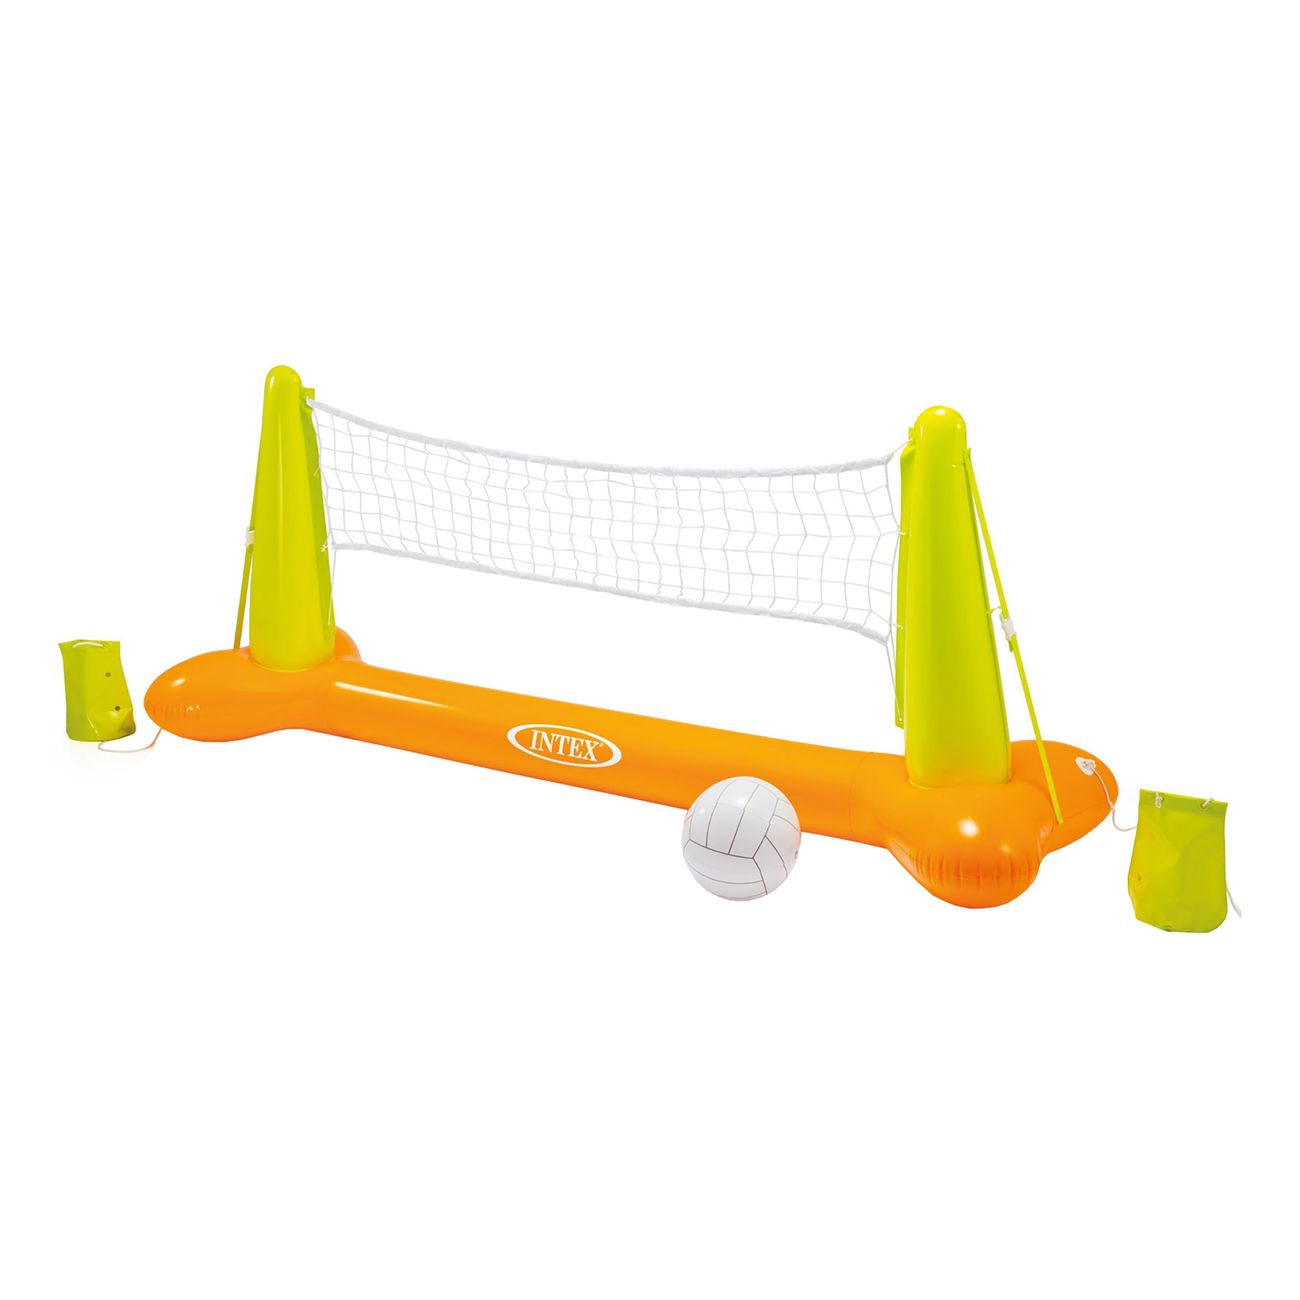 intex-pool-volleyball-game-86429-1